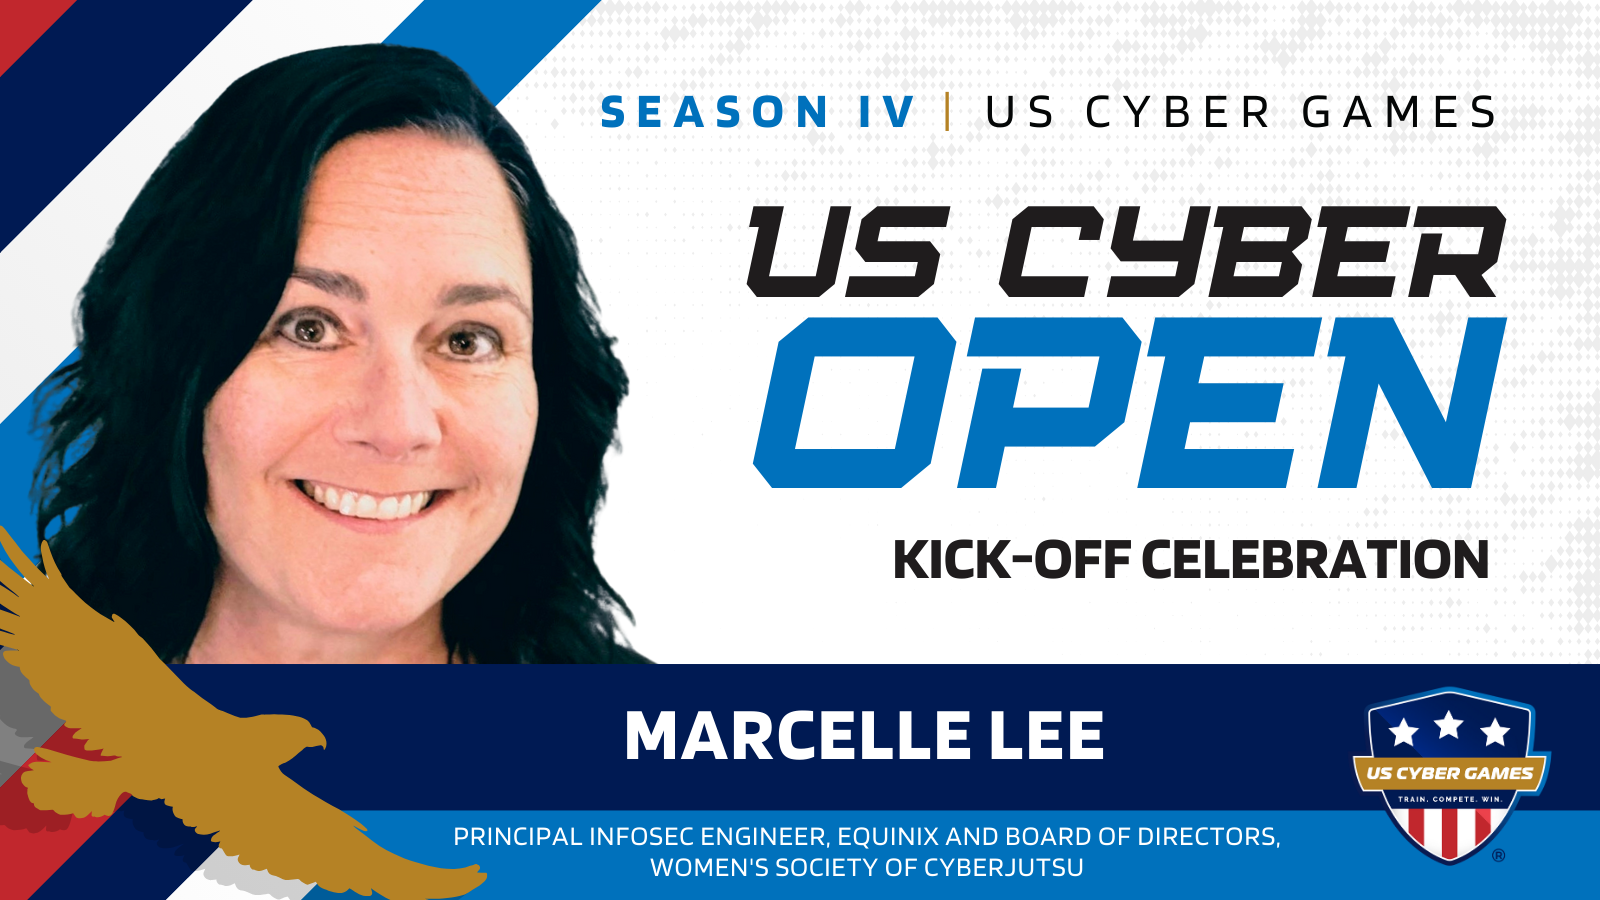 Get Cooking with CyberChef and Marcelle Lee | SIV US Cyber Games Kick-Off